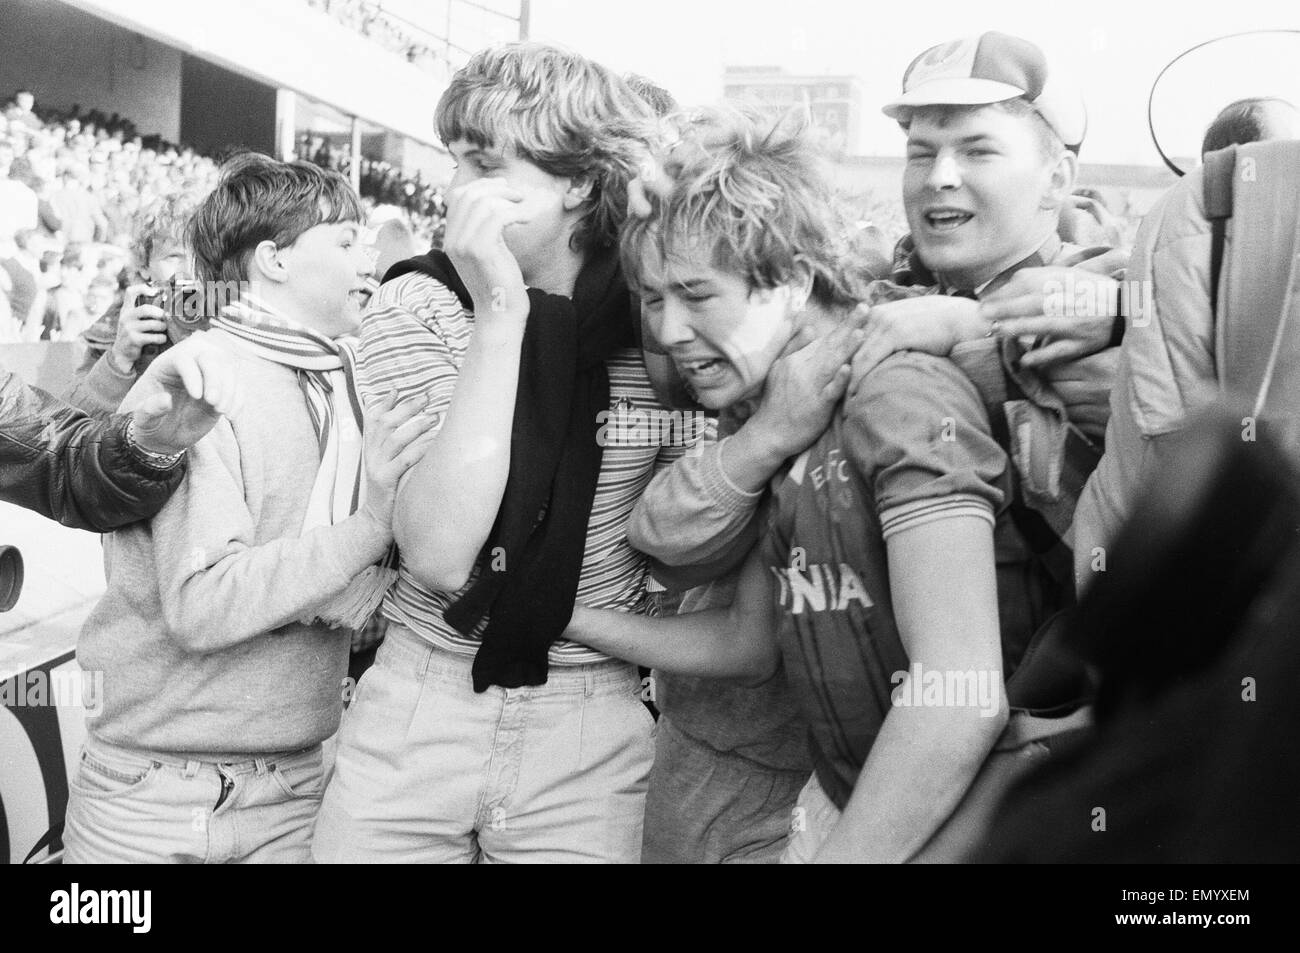 FA Cup Semi Final match at Highbury. Everton 1 v Southampton 0 after extra time. Everton's Adrian Heath is mobbed by jubilant fans who have invaded the pitch as he tries to leave the field at the end. 16th March 1984. Stock Photo